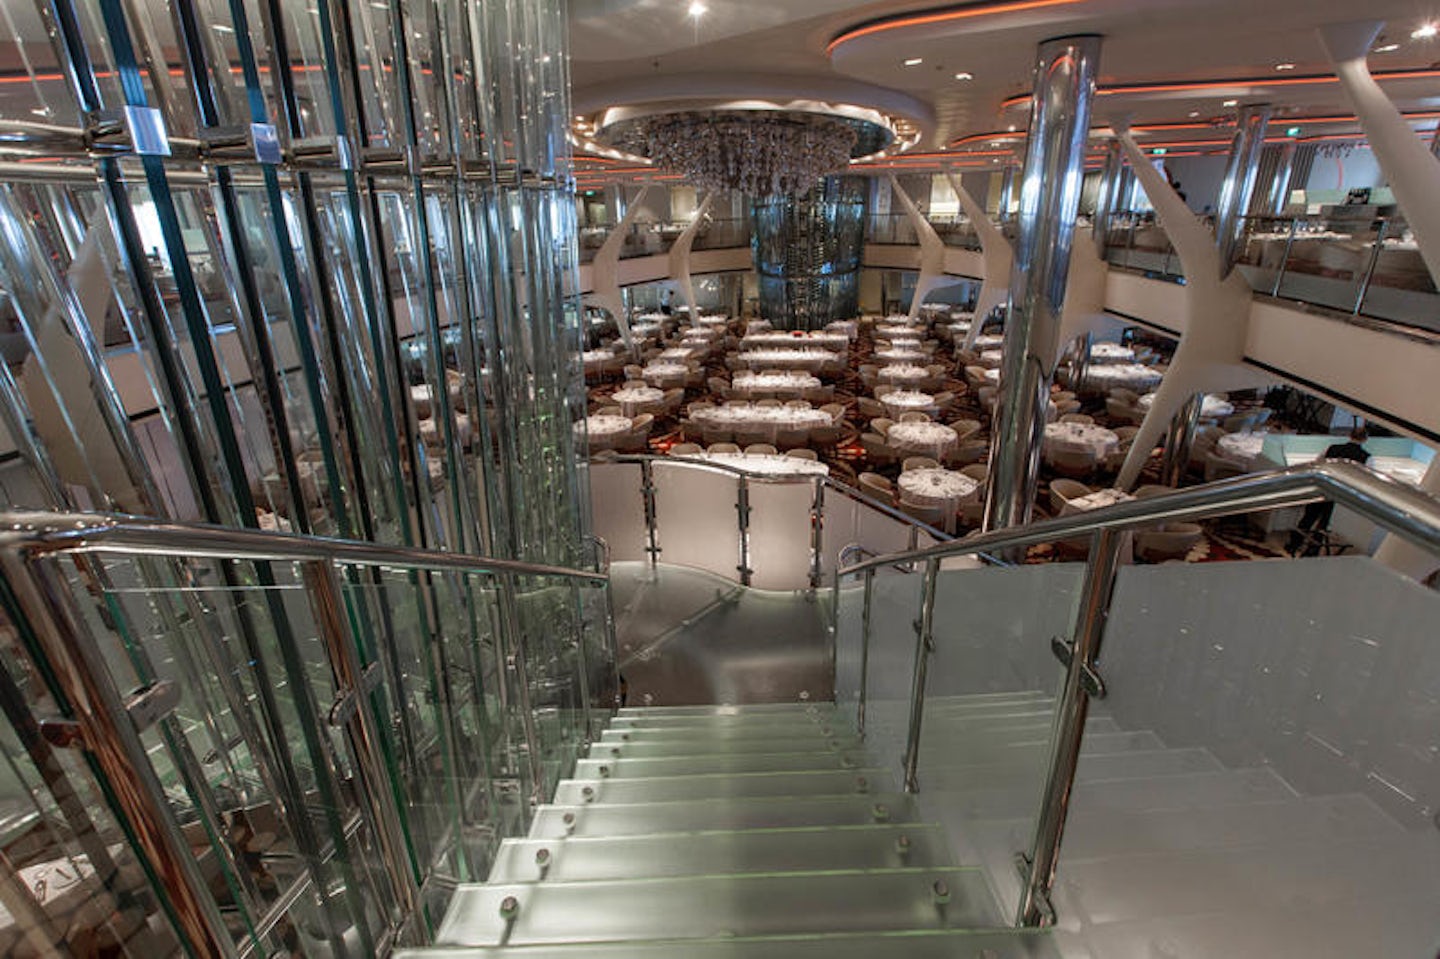 The Silhouette Dining Room on Celebrity Equinox